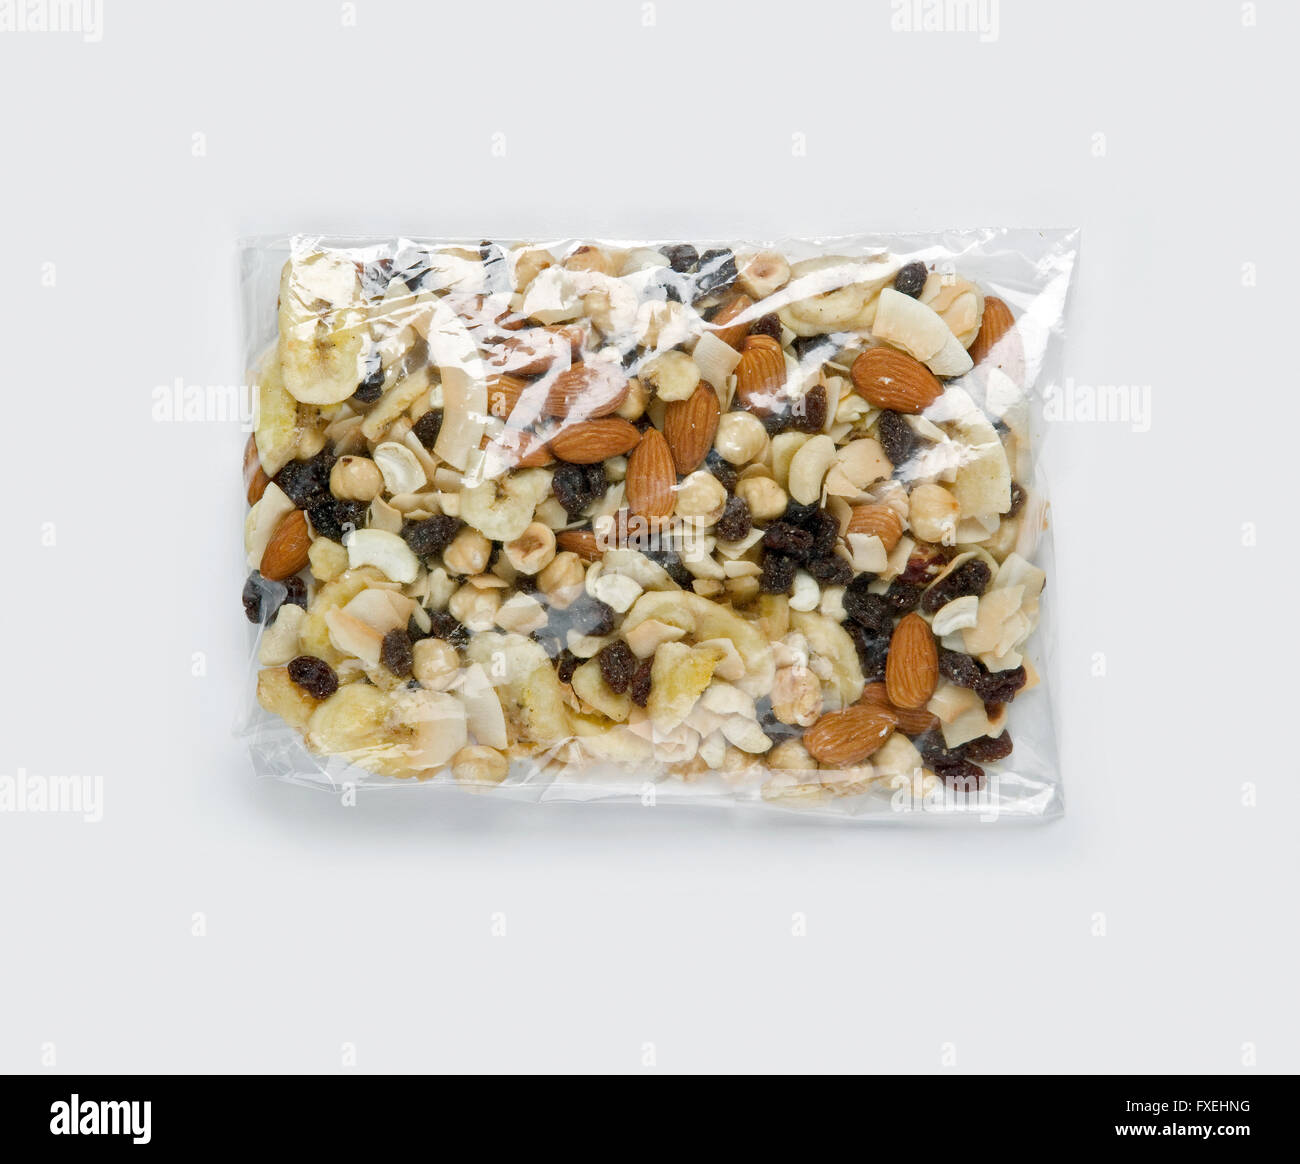 Assorted nuts and dried fruits in clear plastic bag, close-up Stock Photo